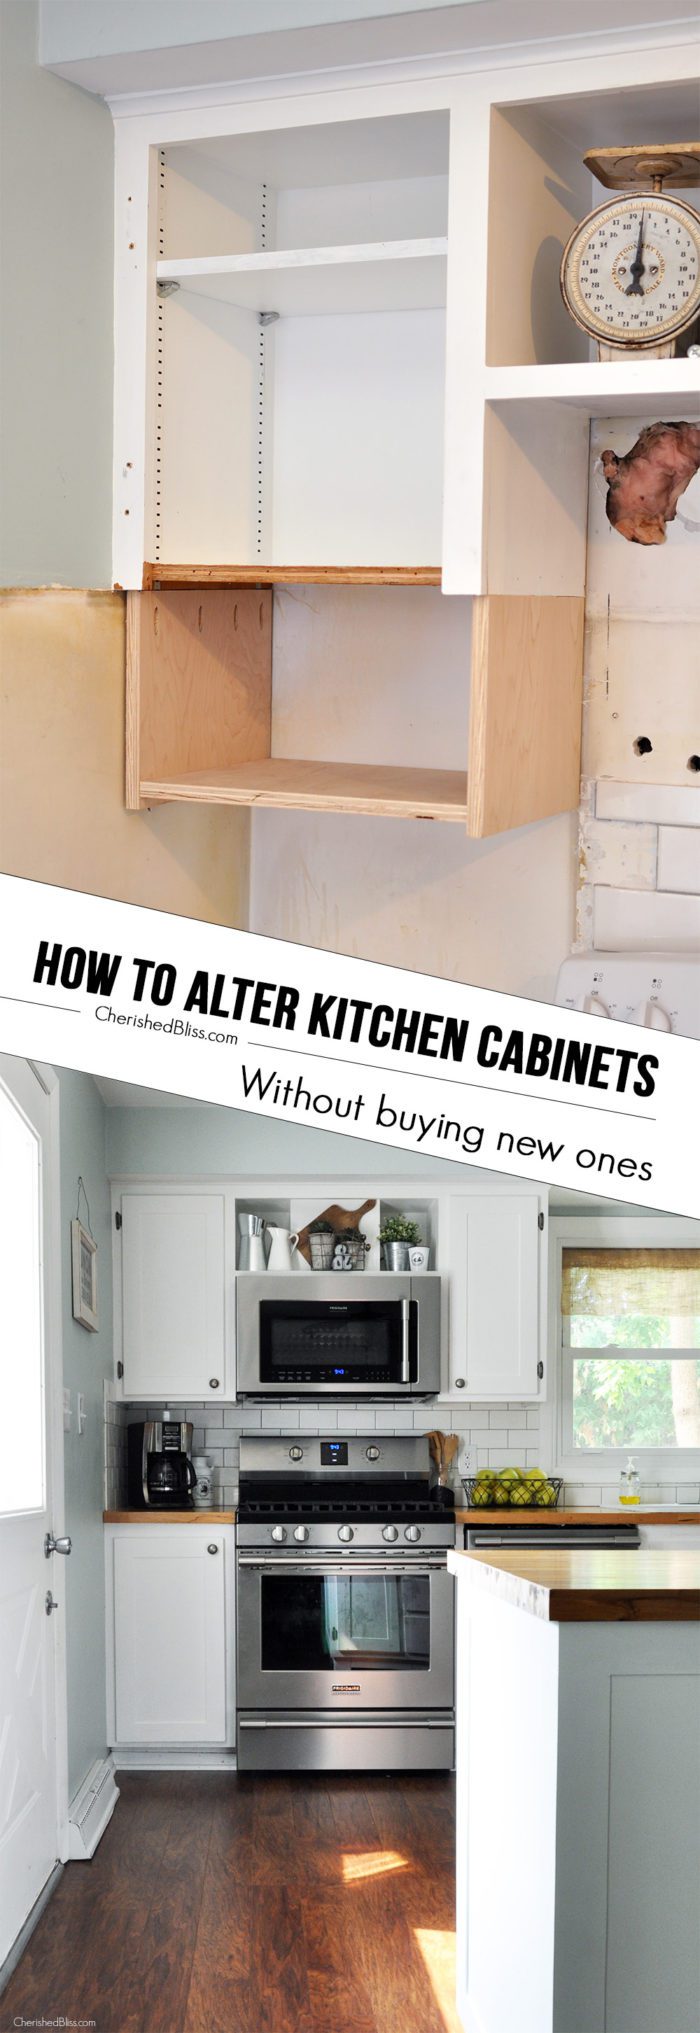 With this tutorial you will learn how to cut down a cabinet and alter the appearance so you can get the look you want, without major kitchen renovations! Save money and DIY! 